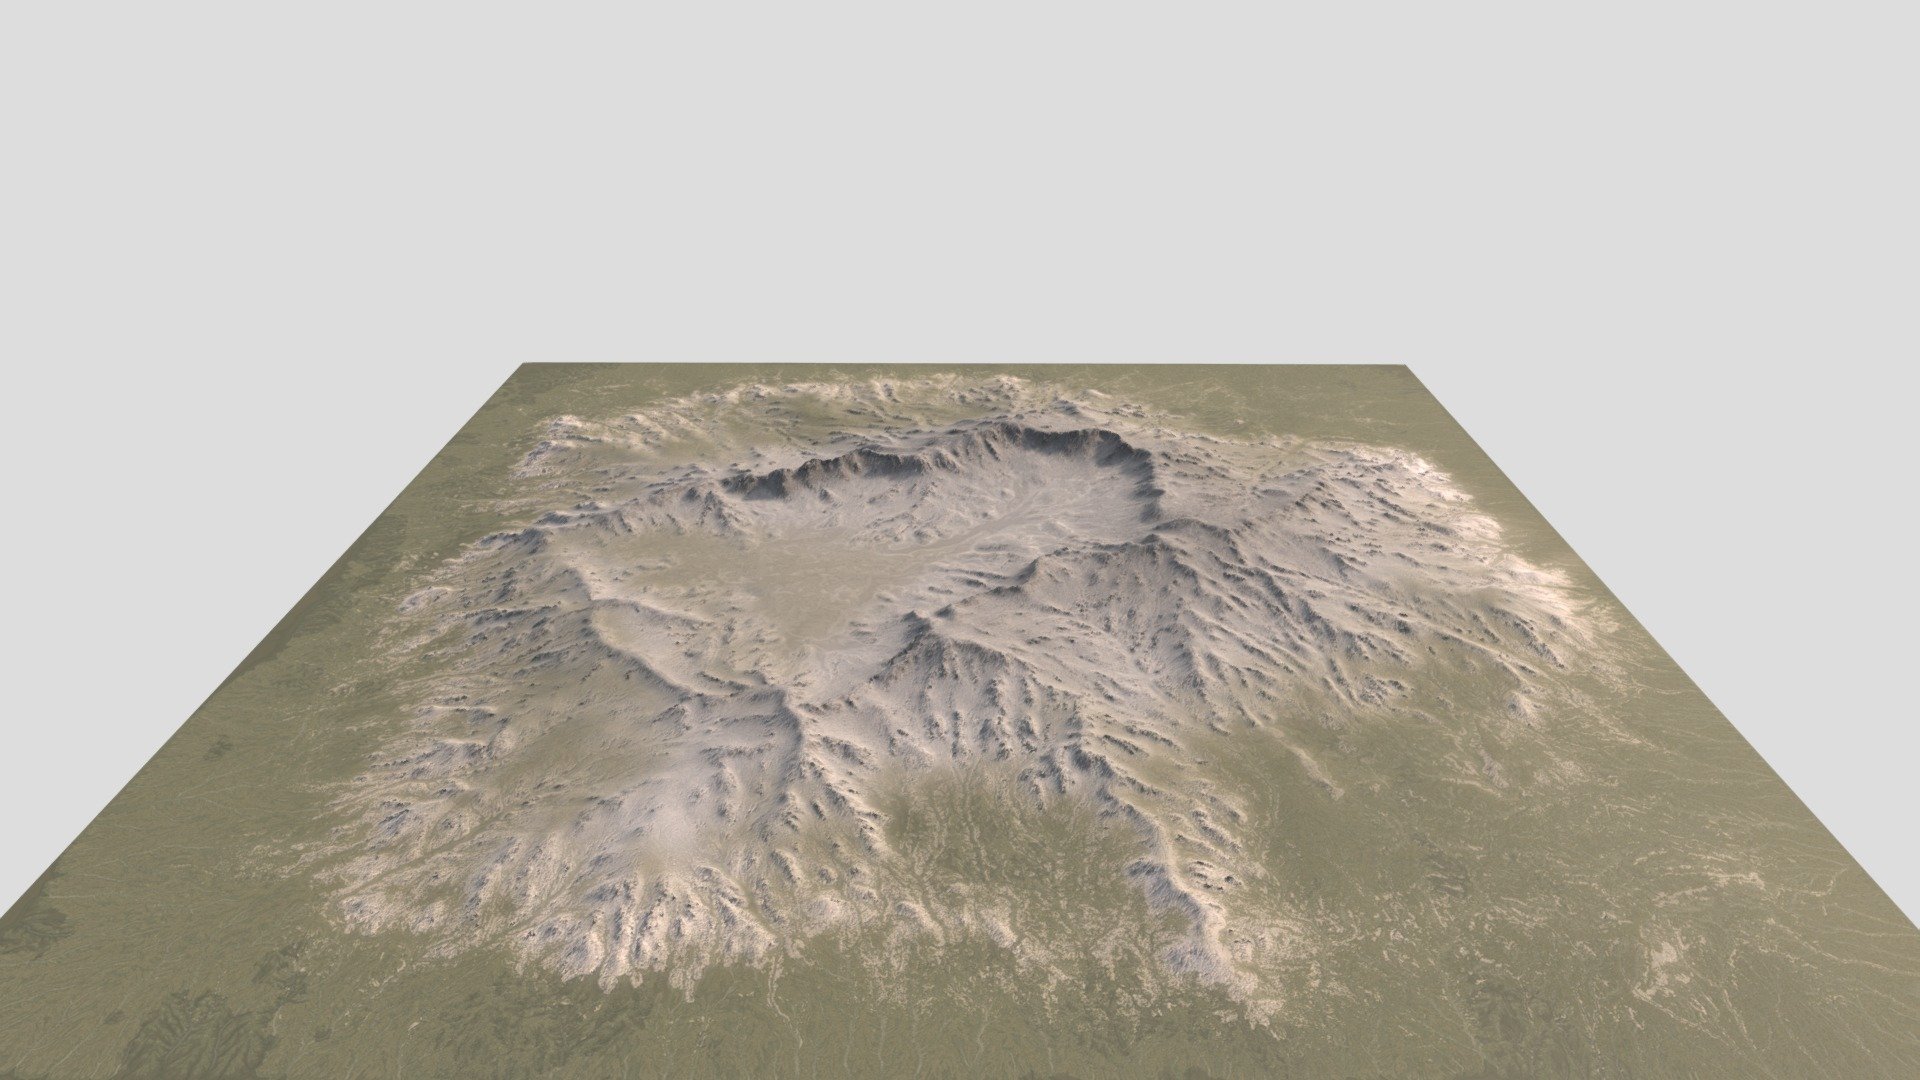 Volcano Mountain Range V.6

Optimized 3D Model of Large Volcano Mountain Range ready for Cinematics, Animations, and Games. This asset is native to Blender and Unreal Engine 5. This asset is based on a 5000x5000 km area but can be scaled to fit your needs and is meant for medium to far shots.

This mesh is Optimized to only have more triangles where needed, while flatter areas contain less triangles.

This Asset Includes:

12, 4K Textures (Color, Color w Lava, Normal, Displacement, Texture, Flow, Occlusion, Slope Mask, Vegetation Mask, Snow Mask, Emission, Height) 2, 4K CC0 Tileable texture sets for additional Detail (Rock and Grass) (Color, Normal, Displacement, Roughness)

3 LODs (LOD0.fbx, LOD1.fbx, LOD2.fbx) .Blend and .Uasset use LOD2, but can easily be replaced for higher LOD for more detail

.Blend contains a Geometry nodes System to easily scatter Trees and vegetation on the terrain in a realistic fashion using the Vegetation mask or custom textures.

.PDF FILE FAQ and Guide Included - Volcano_Mountain_Terrain Version 6 - Buy Royalty Free 3D model by Desertsage 3d model